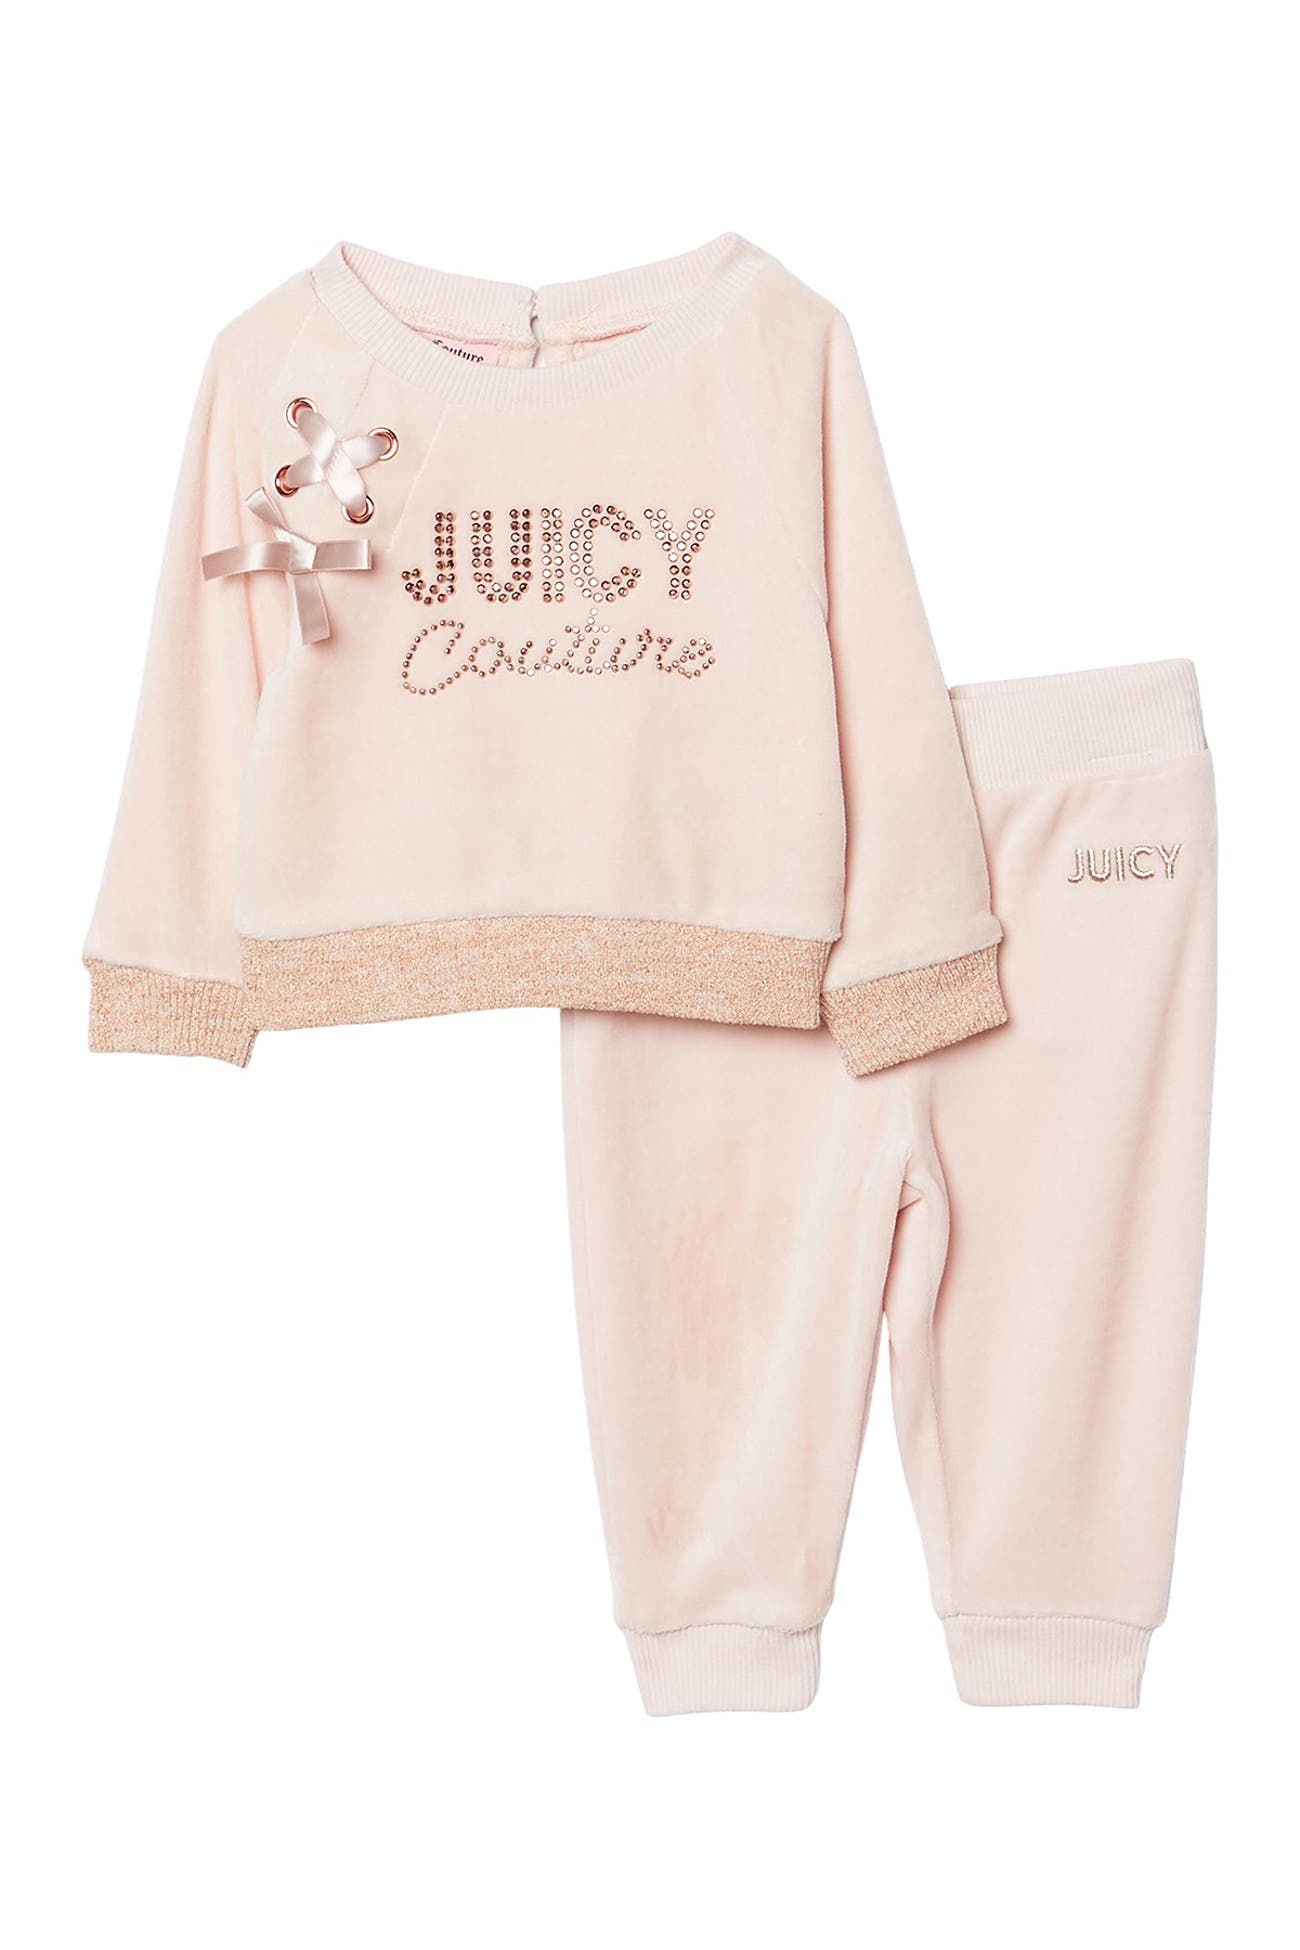 Juicy Couture | Baby Girls Tracksuit | Nordstrom Rack